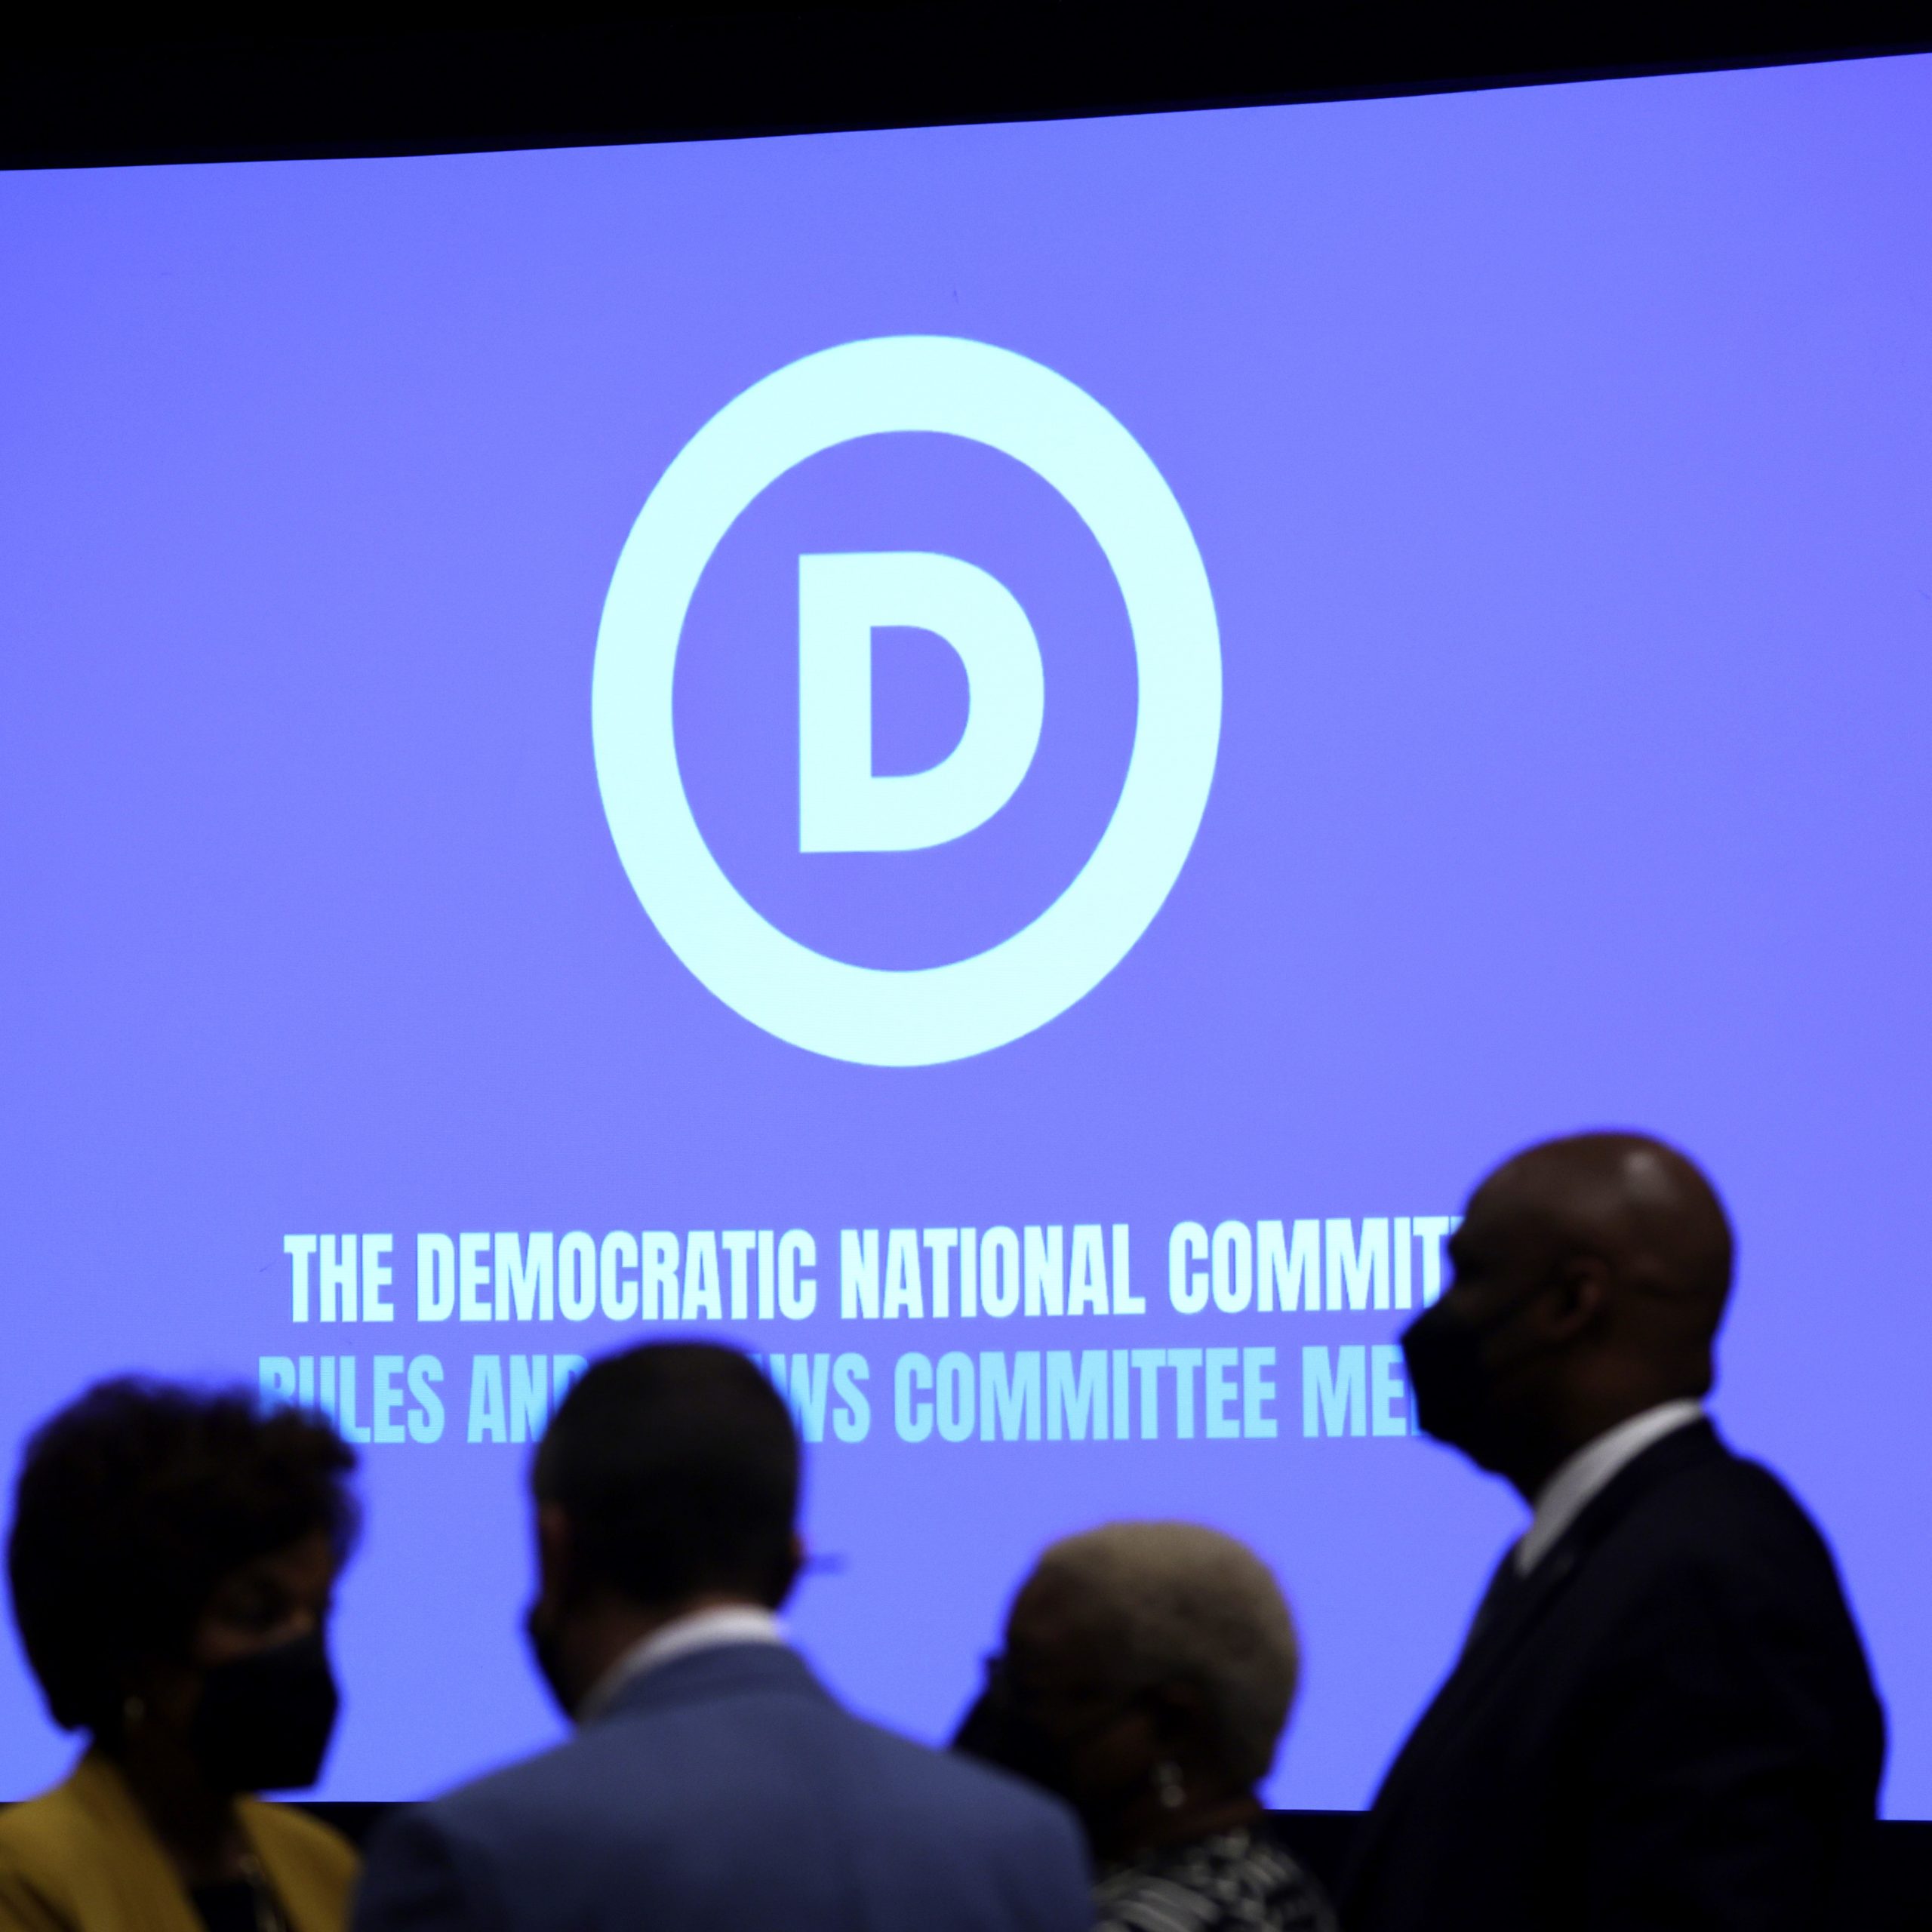 DNC and joint fundraising arm introduced in .1M in Could